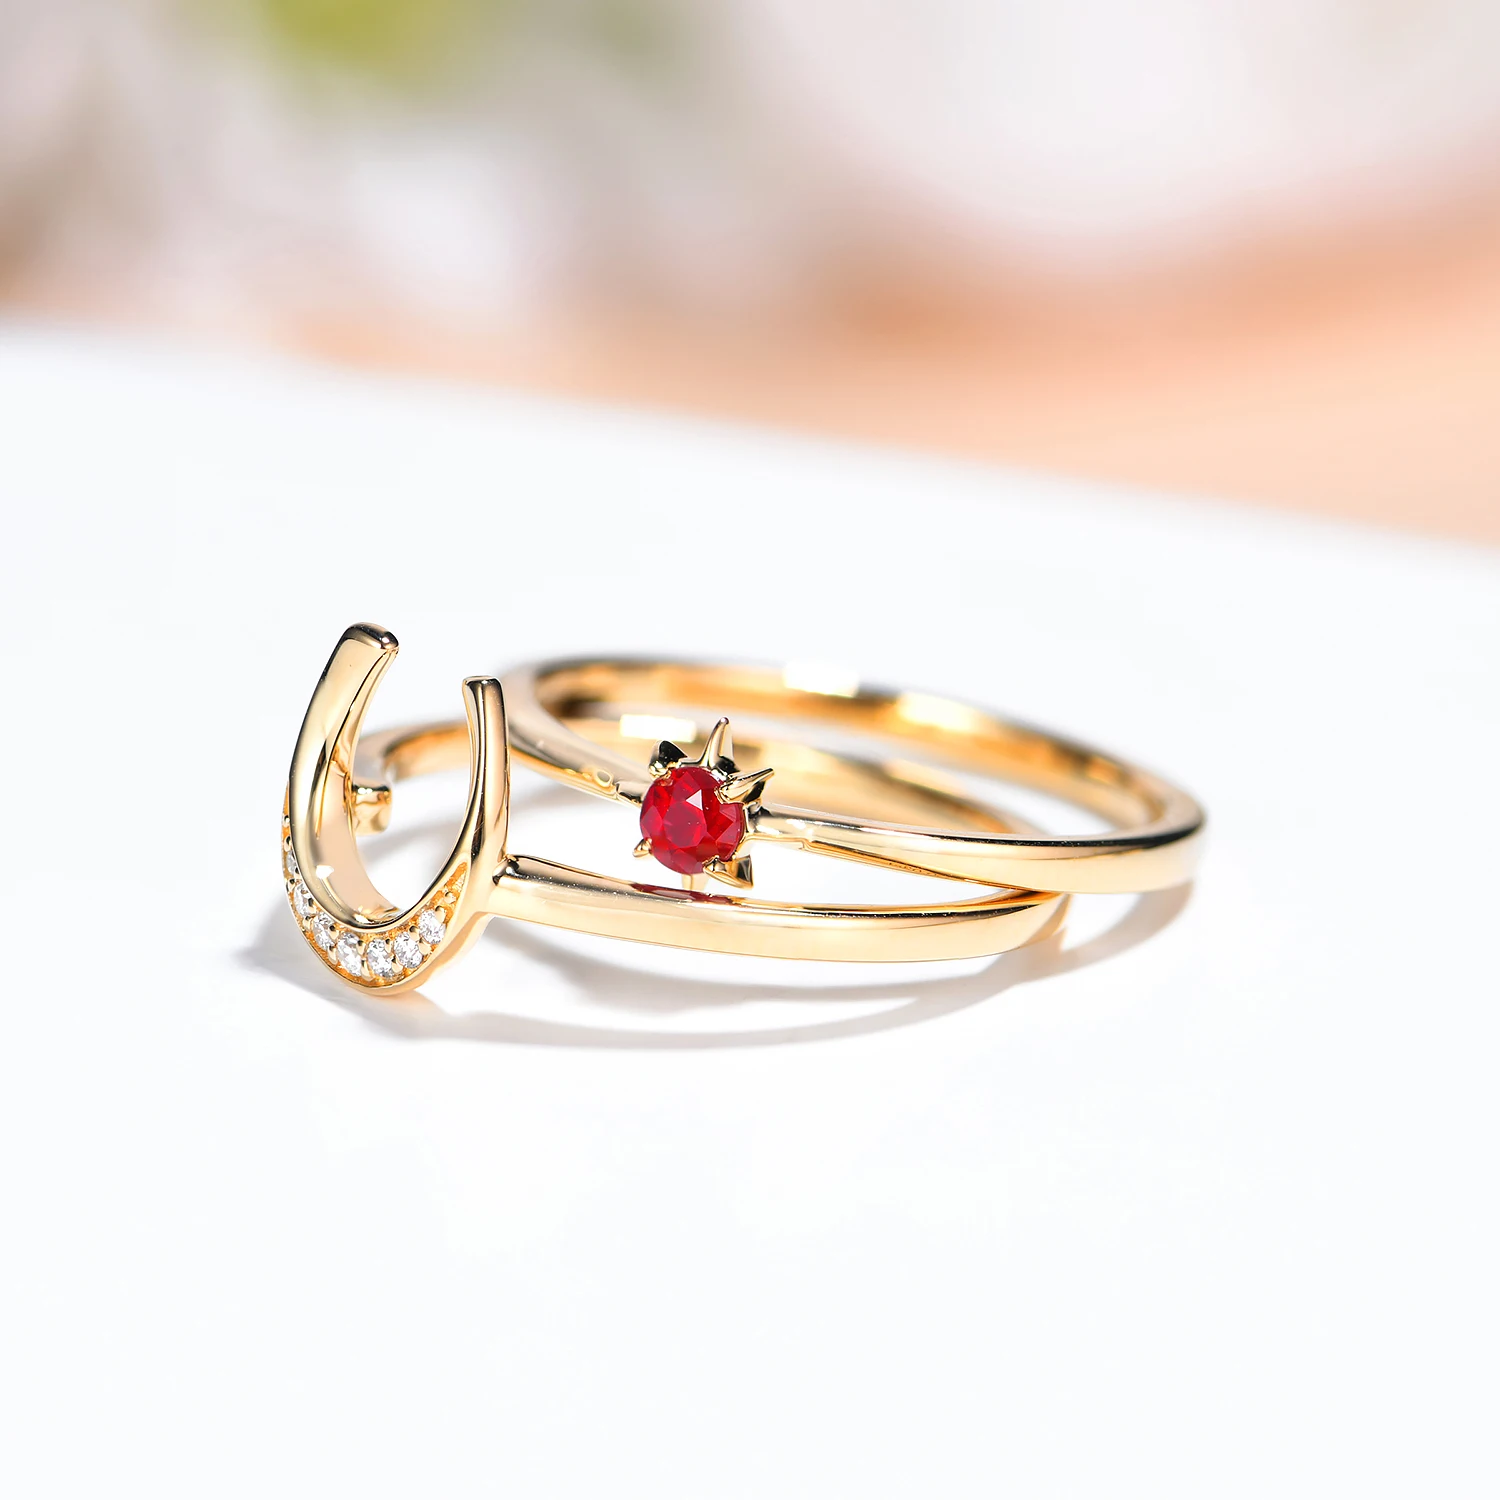 Ruby Gemstone Natural Rose Two In One Ring Buy Ruby Gemstone Natural Ruby Ruby Rose Product On Alibaba Com